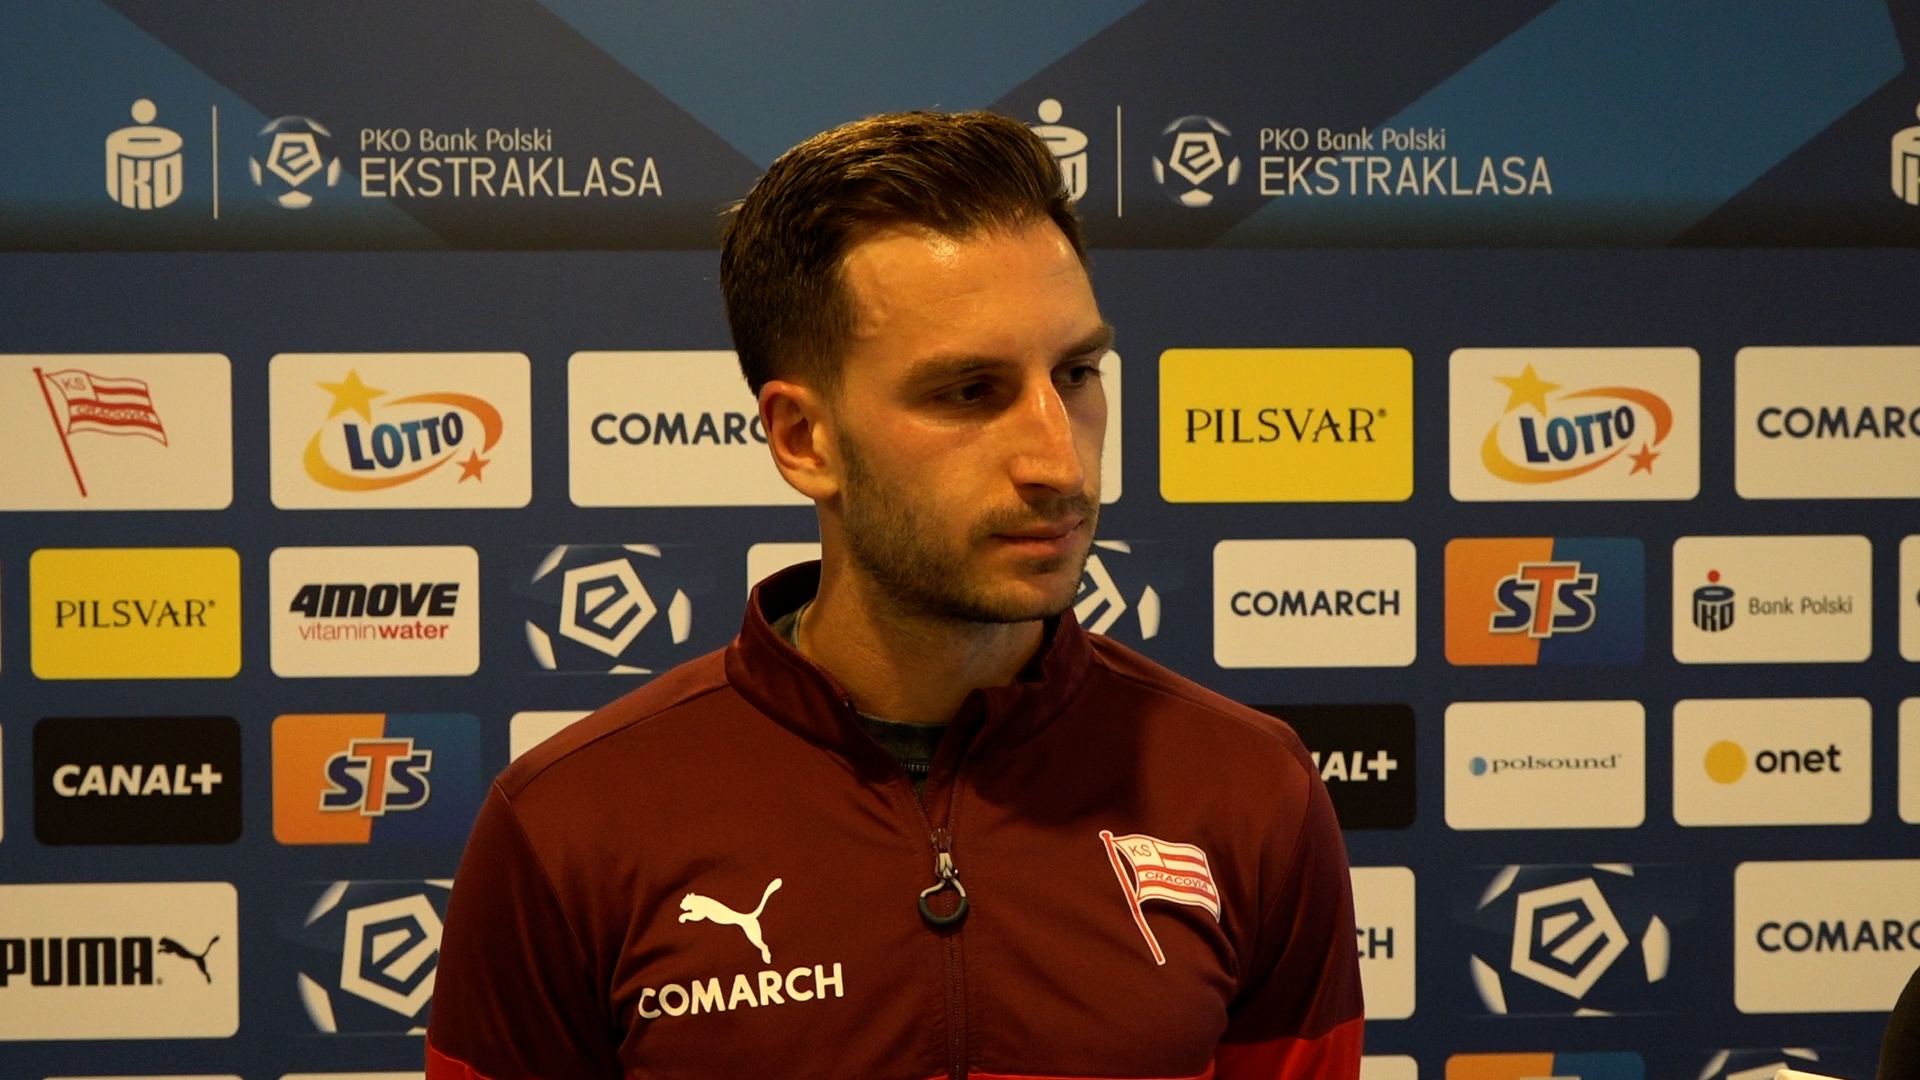 Otar Kakabadze: "We have to say that we lost 2 points today"